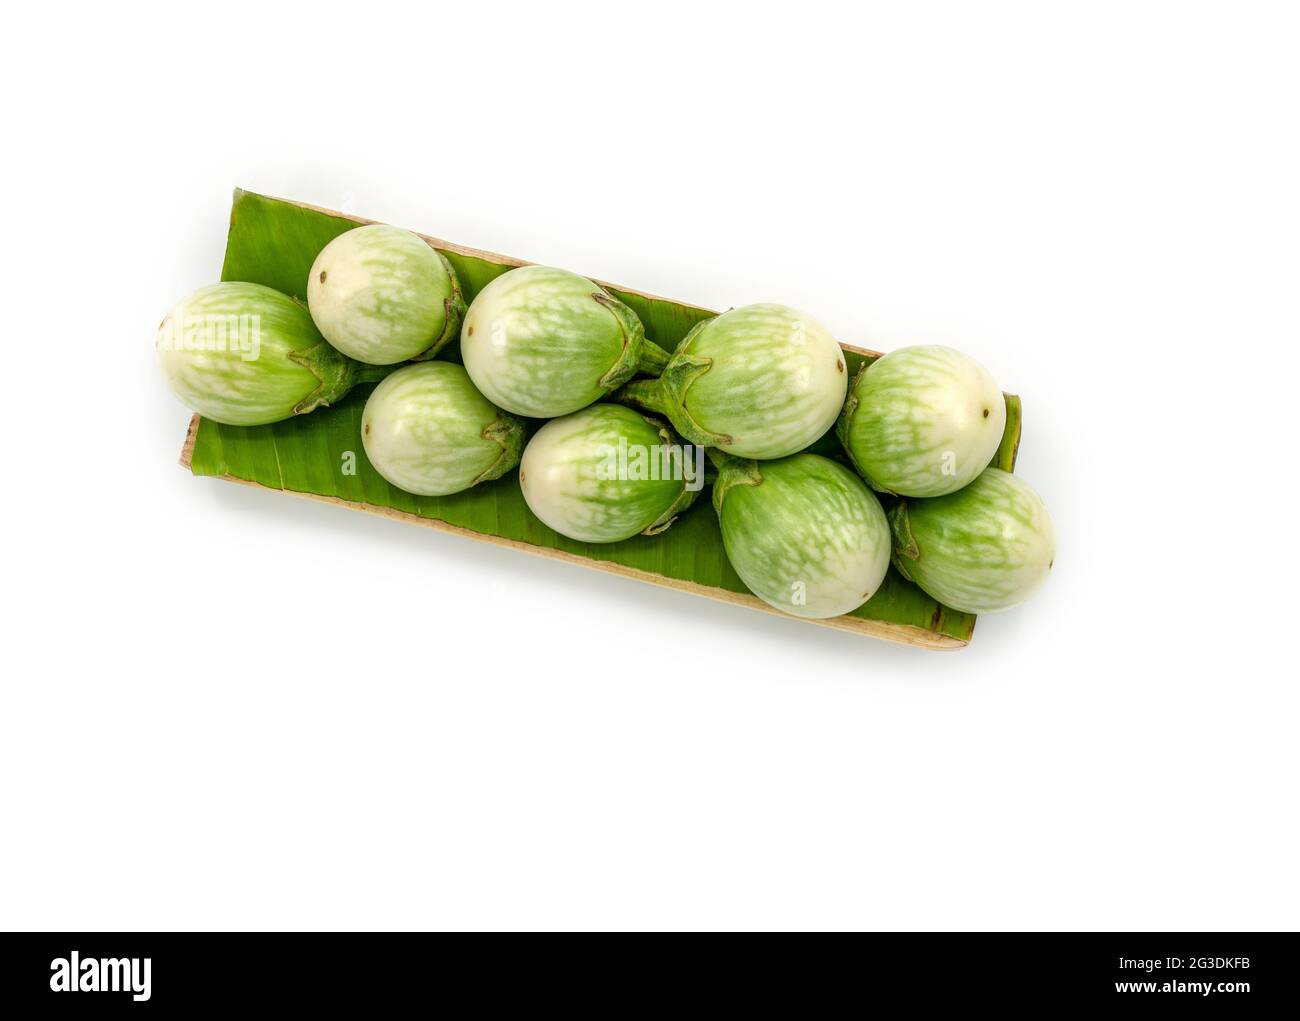 Fresh organic Thai eggplants on a banana leaf with a tray that made from a banana tree, the image on white background, top view Thai eggplant. Stock Photo